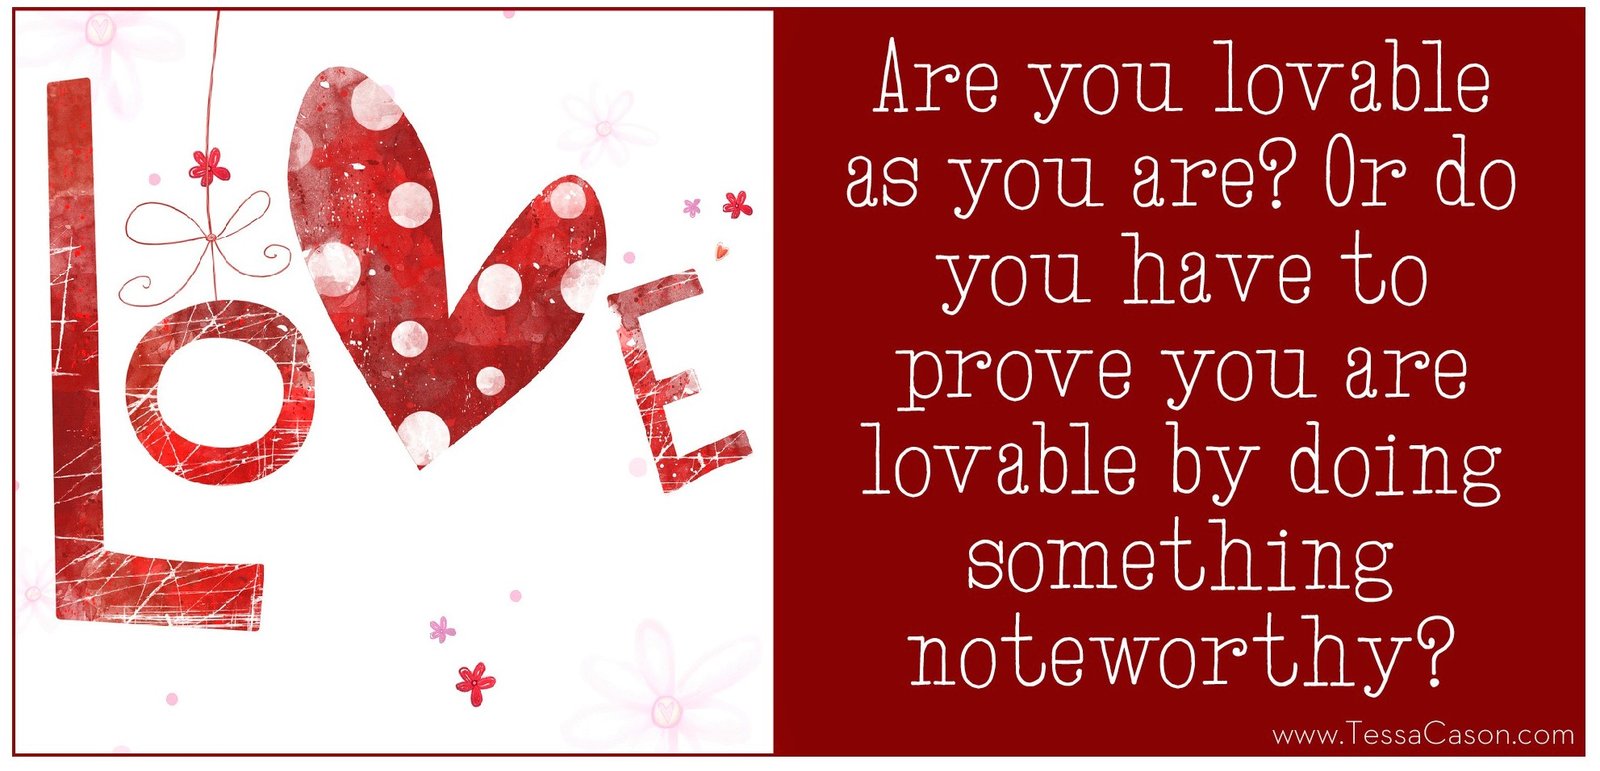 Are you lovable as you are question